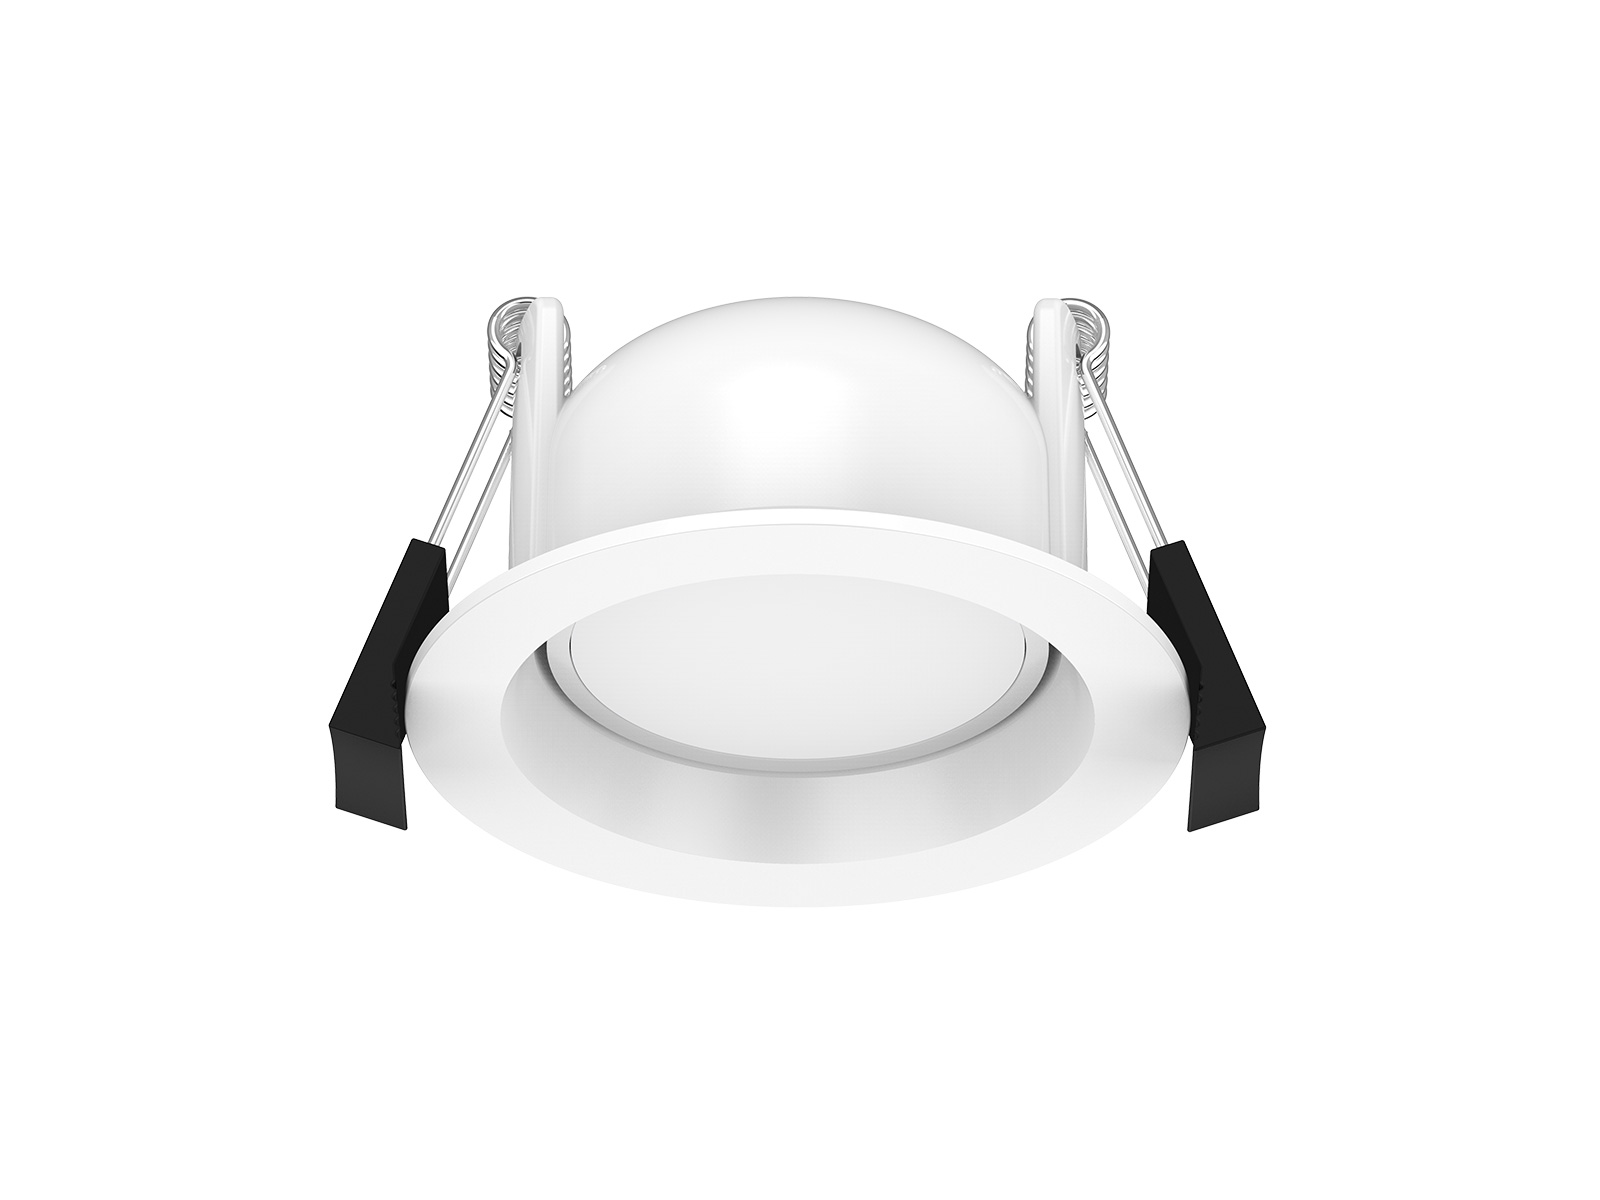 DL150 dimmable led downlights bunnings